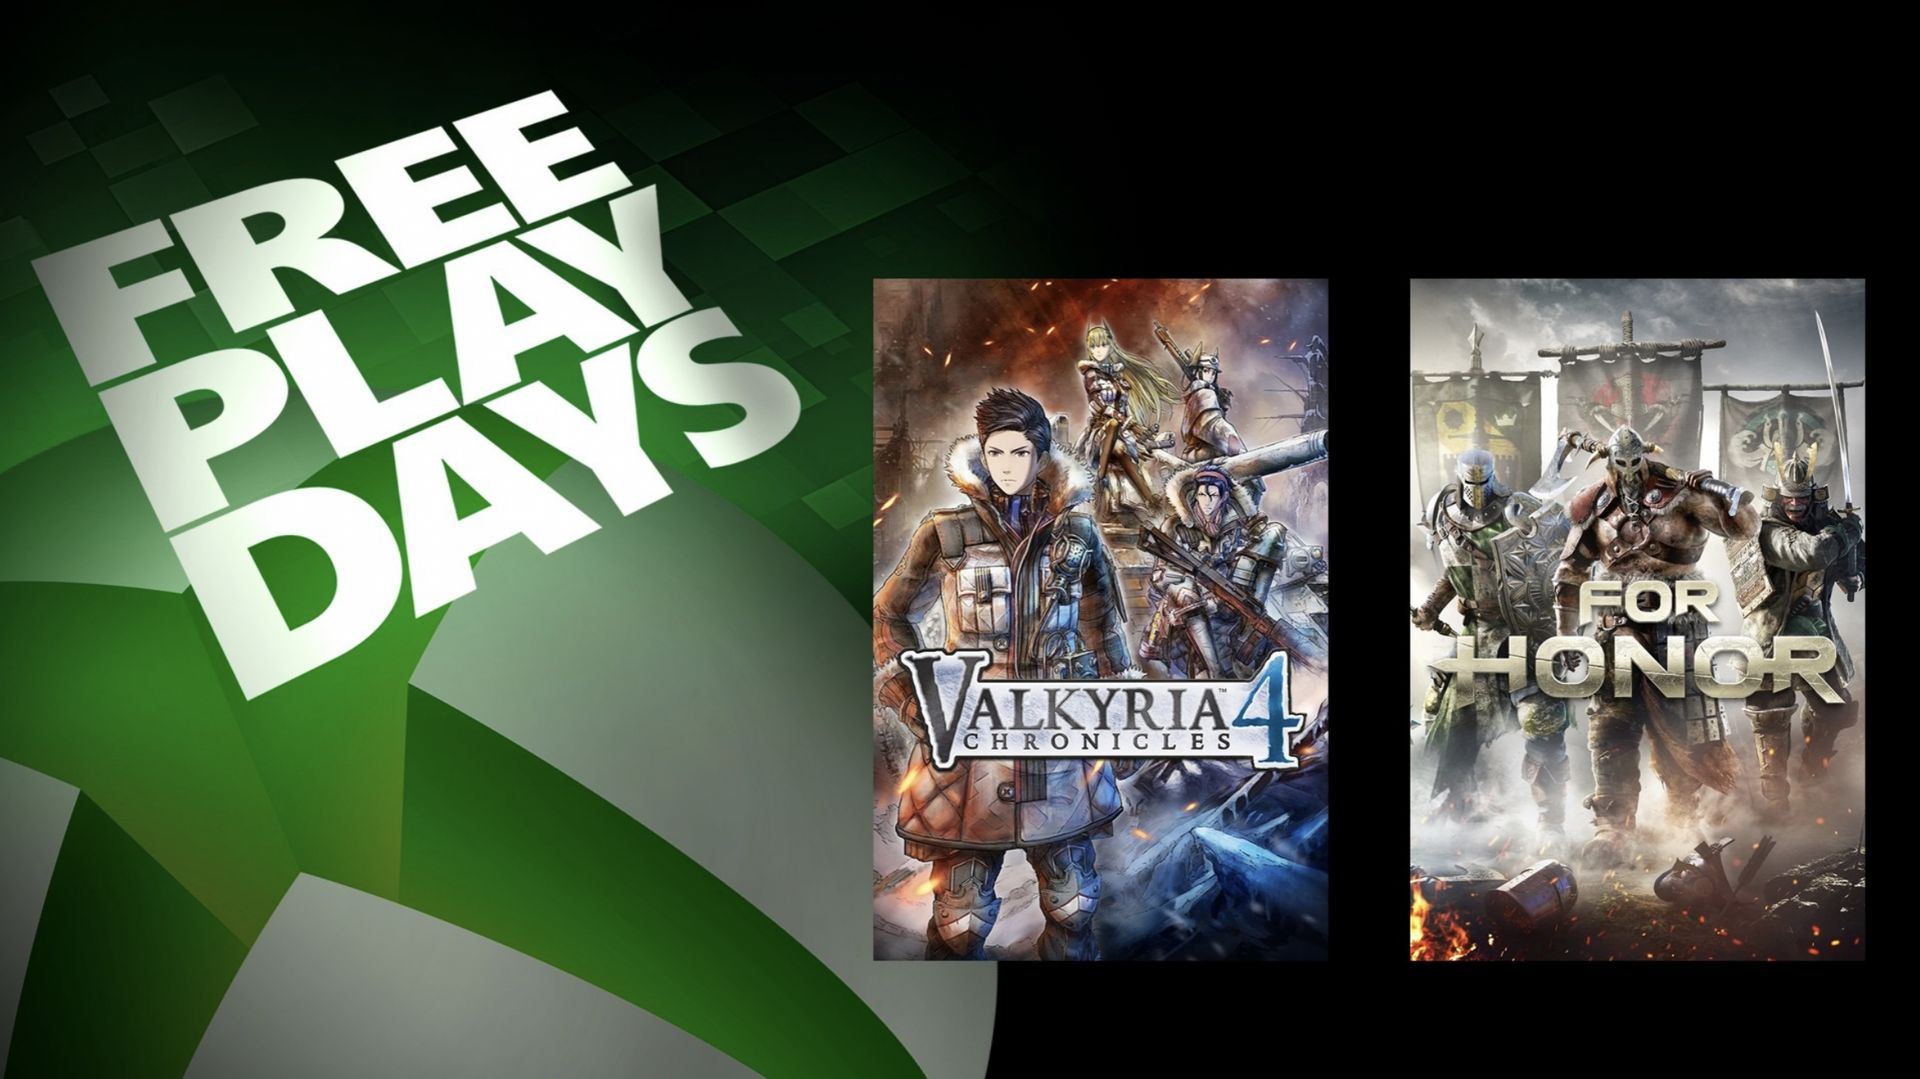 Free Play Days : Valkyria Chronicles 4 et For Honor sont gratuits ce week-end